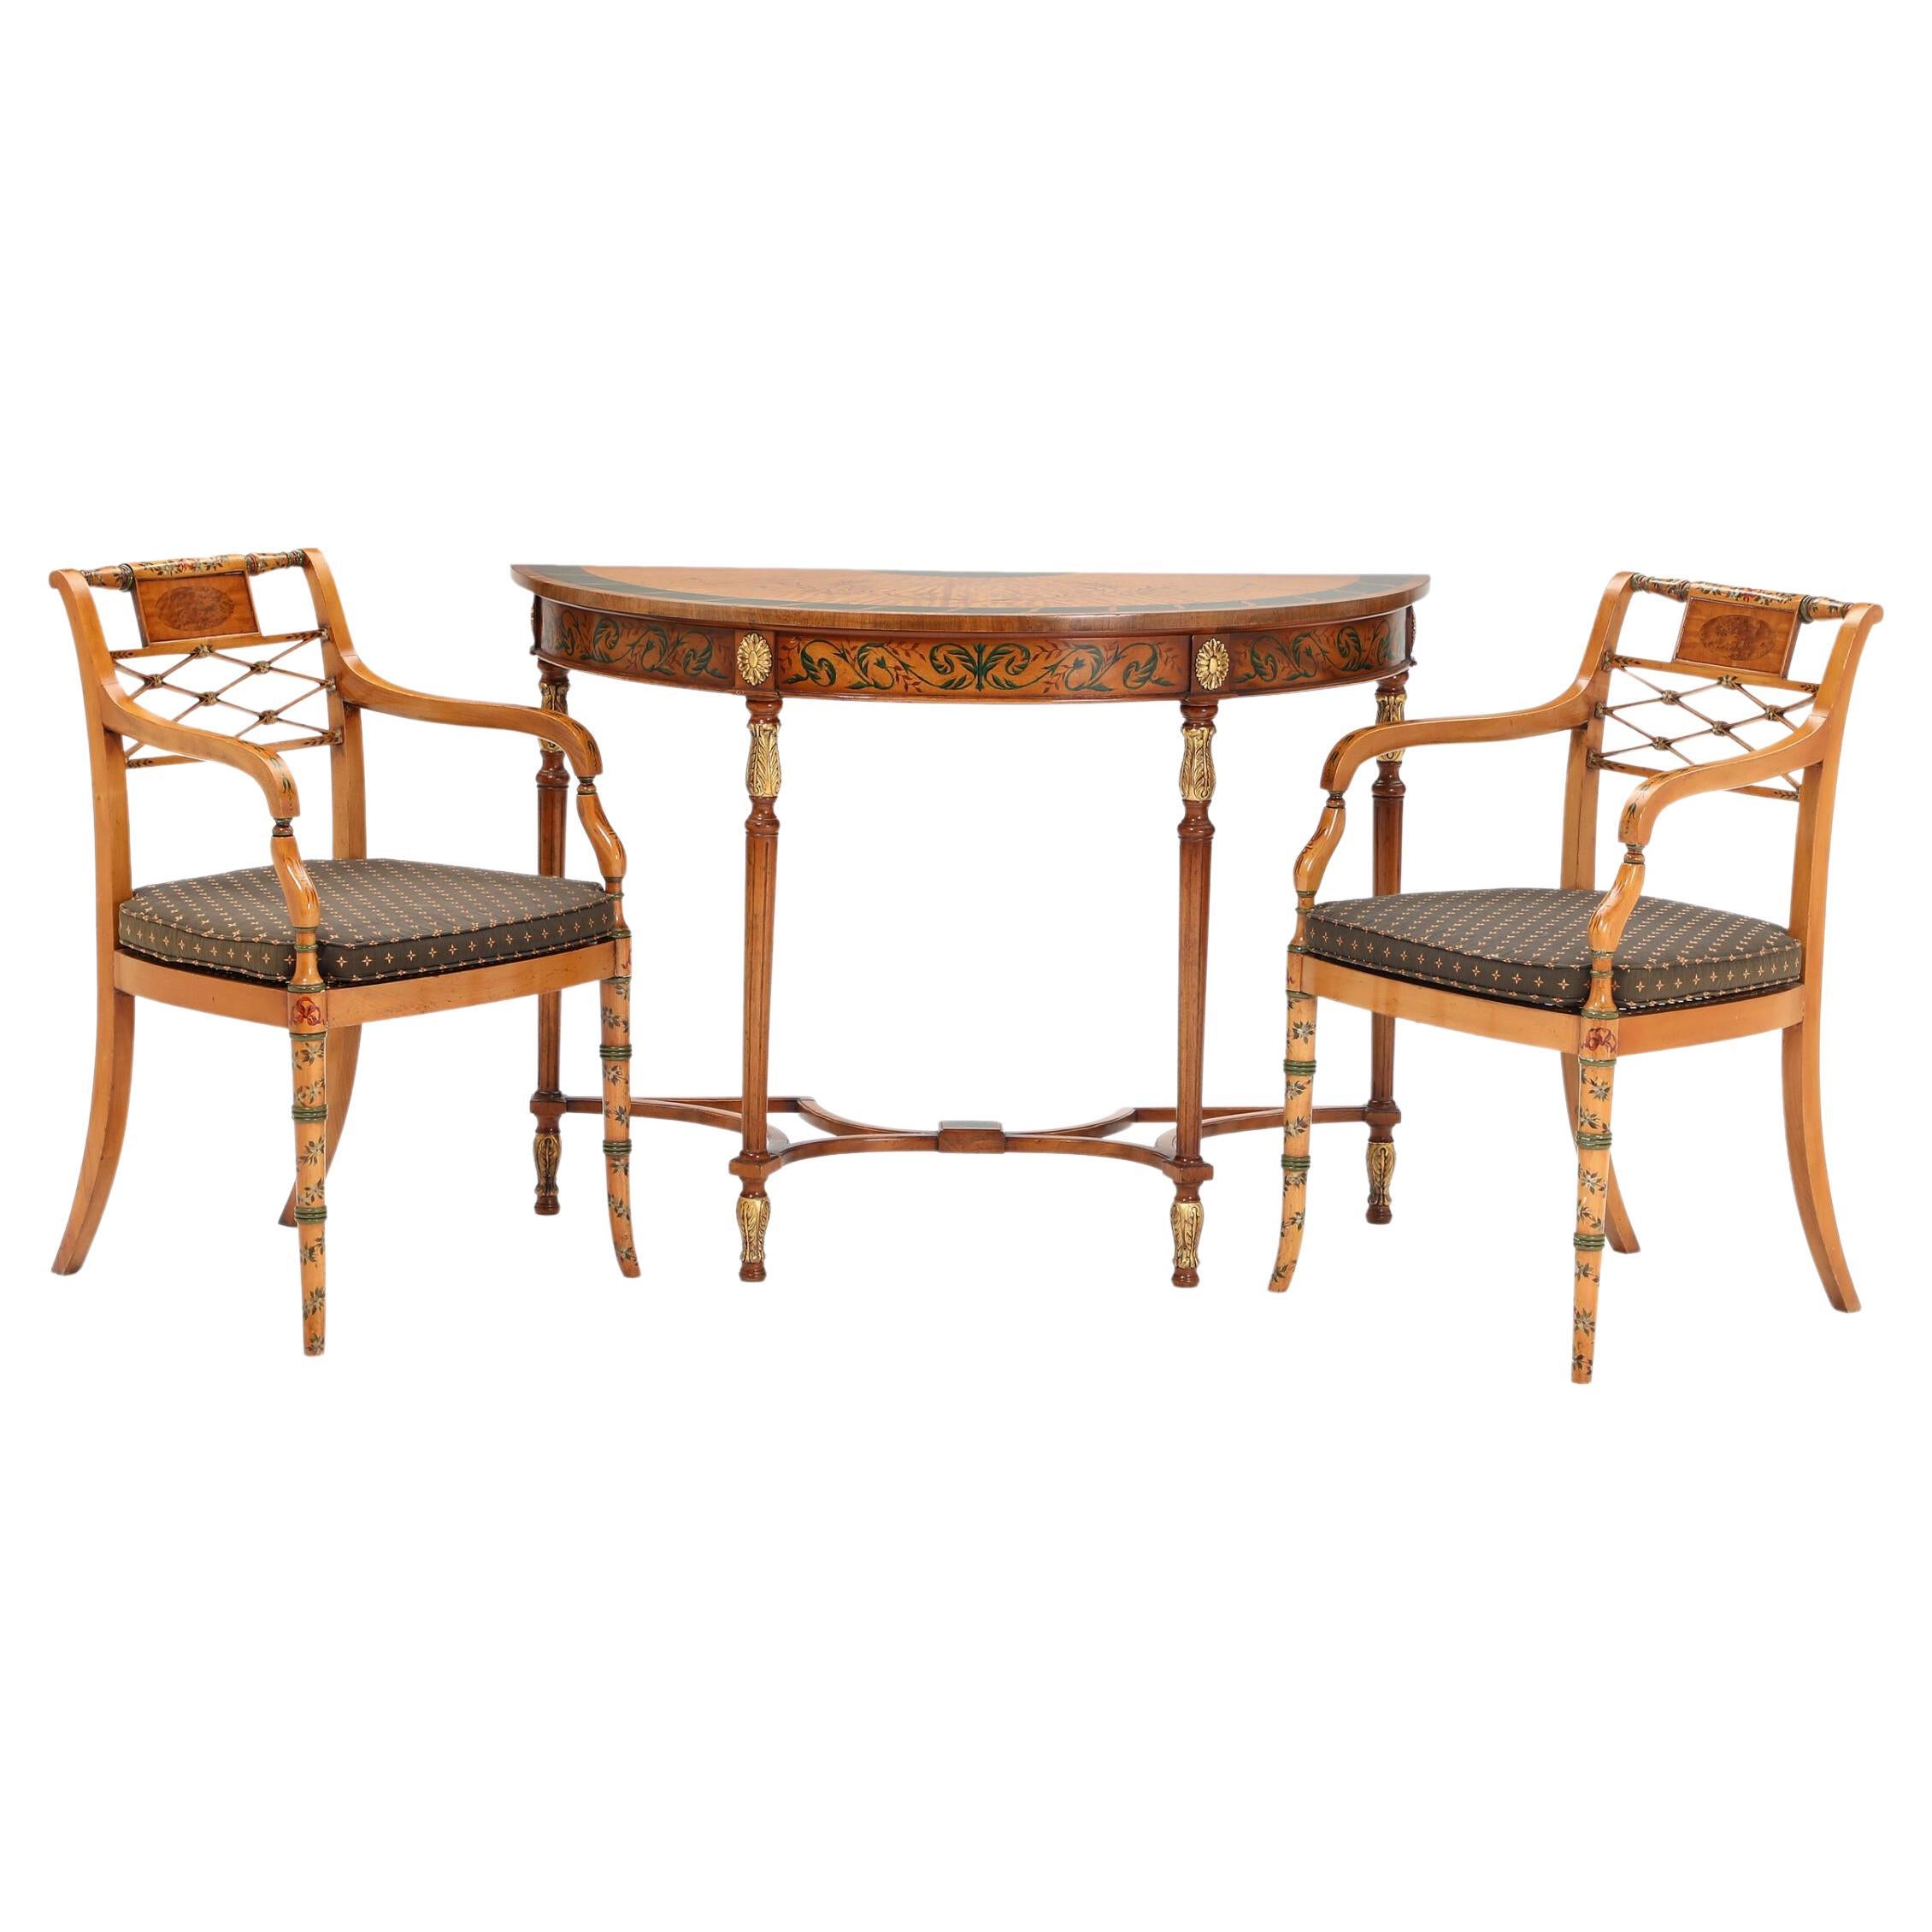 Magnificent Pair of Antique Sheraton Style Chairs Date Around the 1930s For Sale